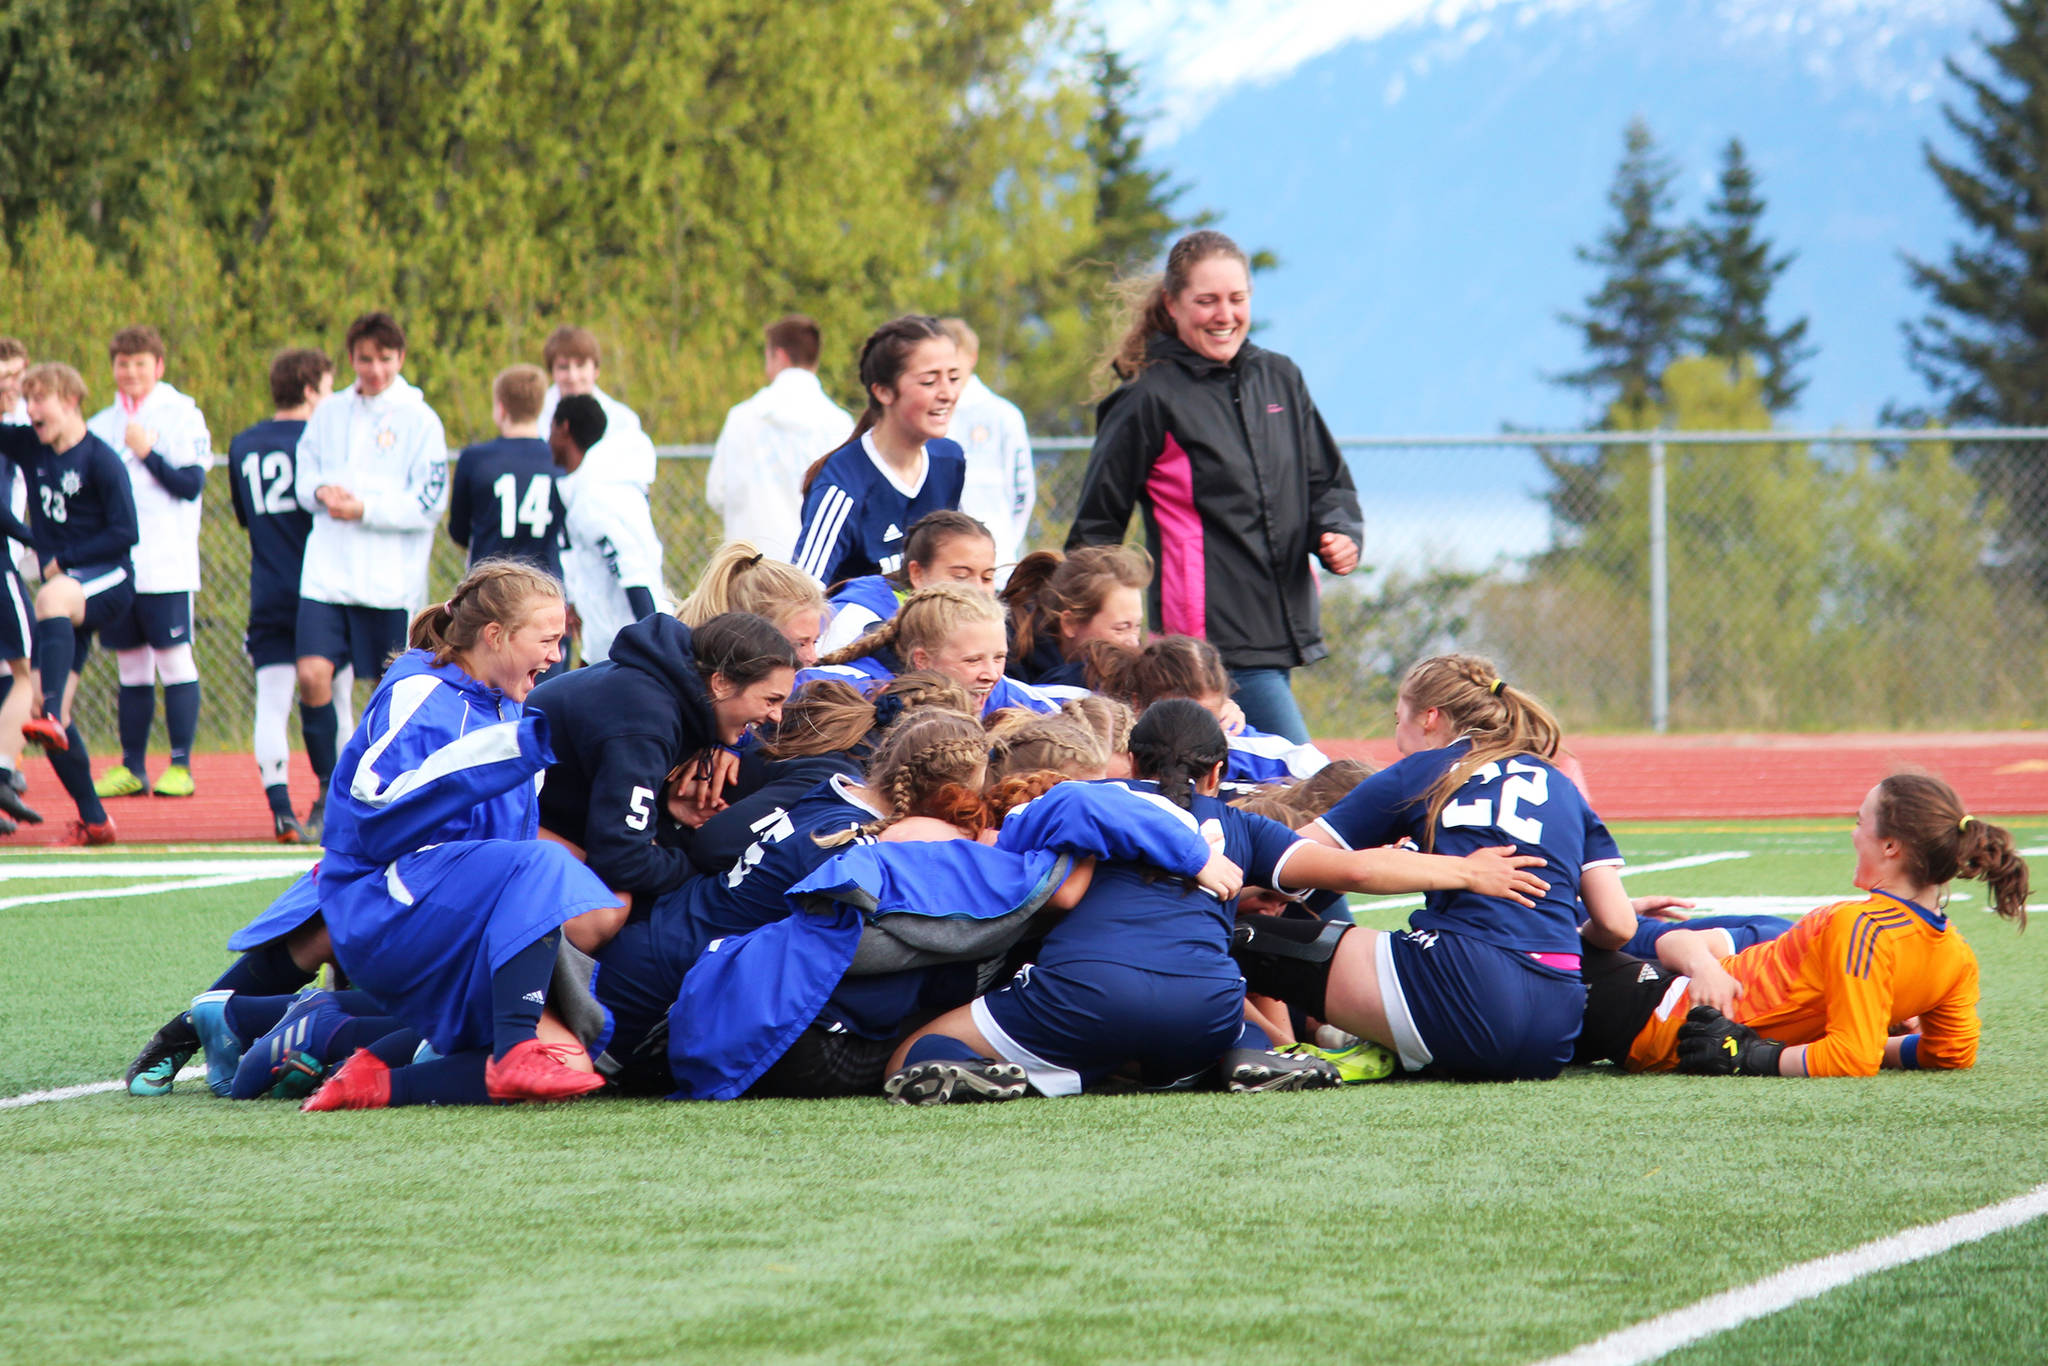 The Homer girls soccer team celebrates its 4-3 win over Kenai Central High School in the semi-final match of the Peninsula Conference Soccer Tournament on Friday, May 17, 2019 at Homer High School in Homer, Alaska. They game went into overtime and two rounds of penalty kicks before a winner was declared. (Photo by Megan Pacer/Homer News)